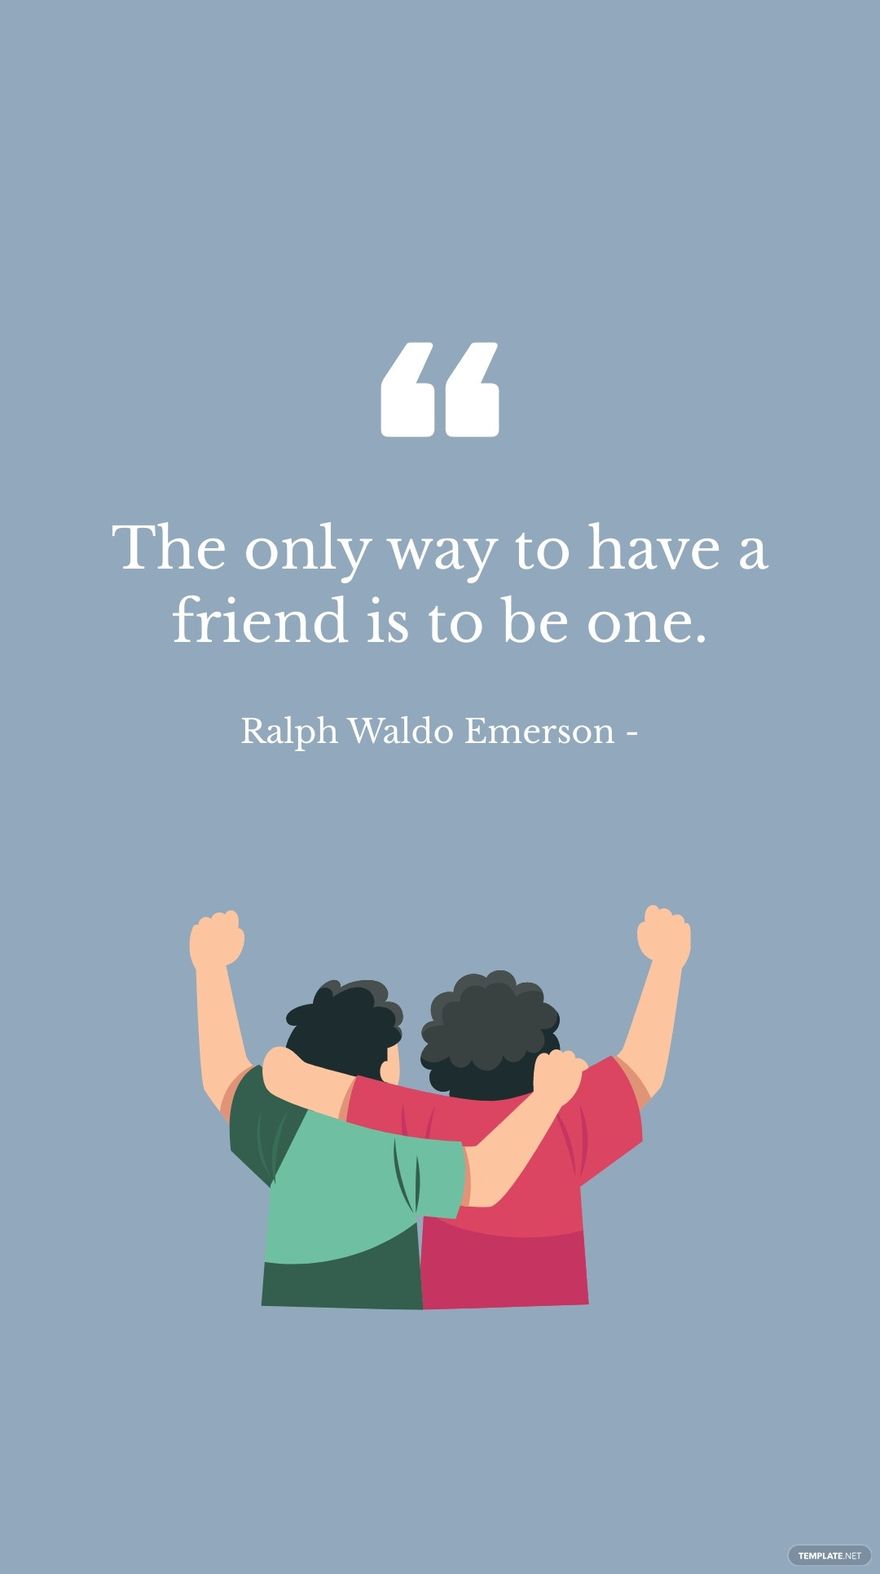 Free Ralph Waldo Emerson - The only way to have a friend is to be one.